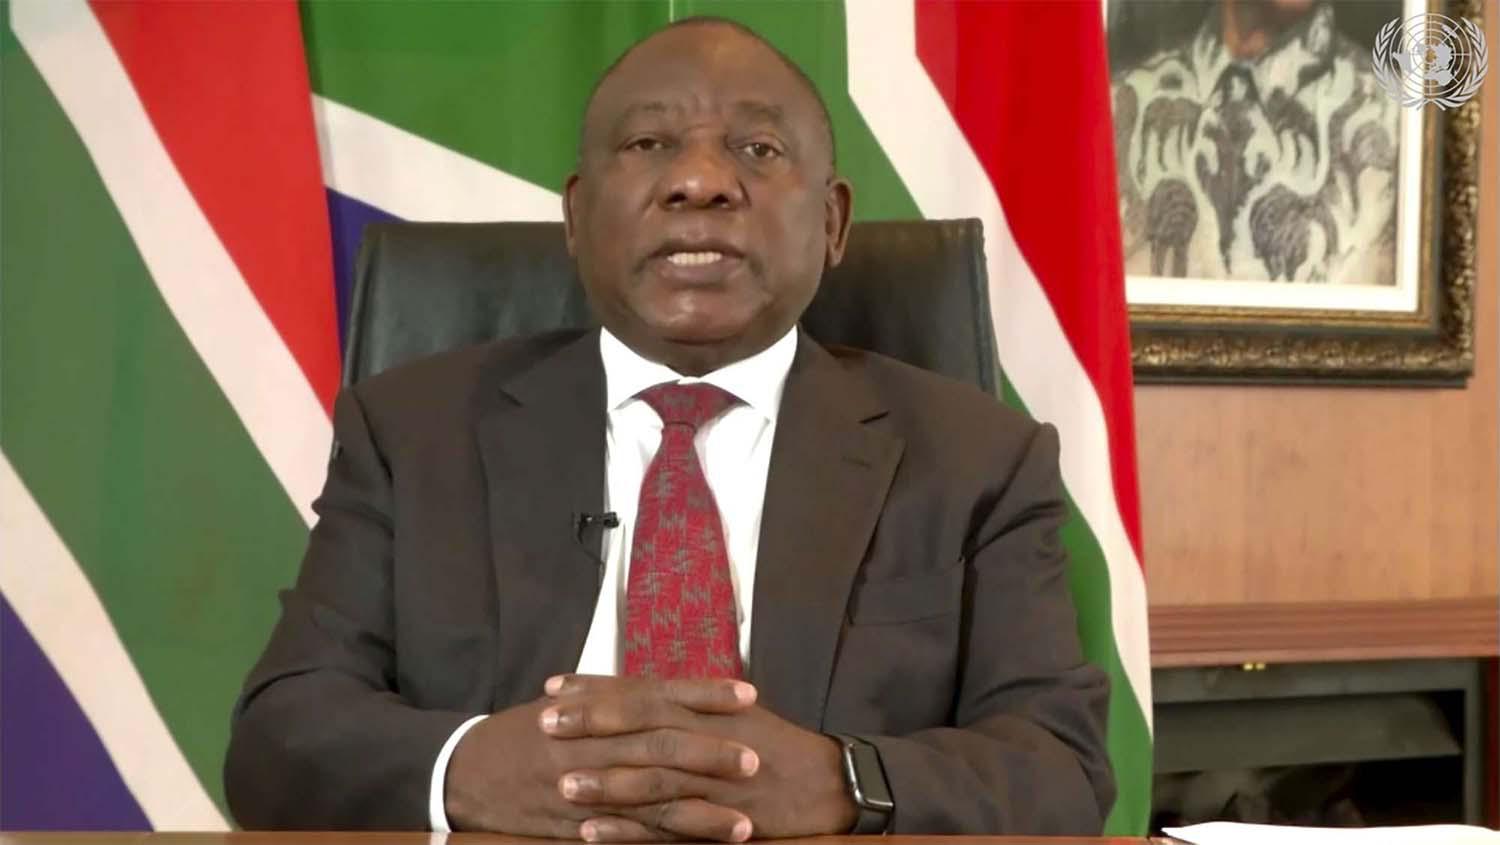 Cyril Ramaphosa, South Africa’s President and current President of the African Union 